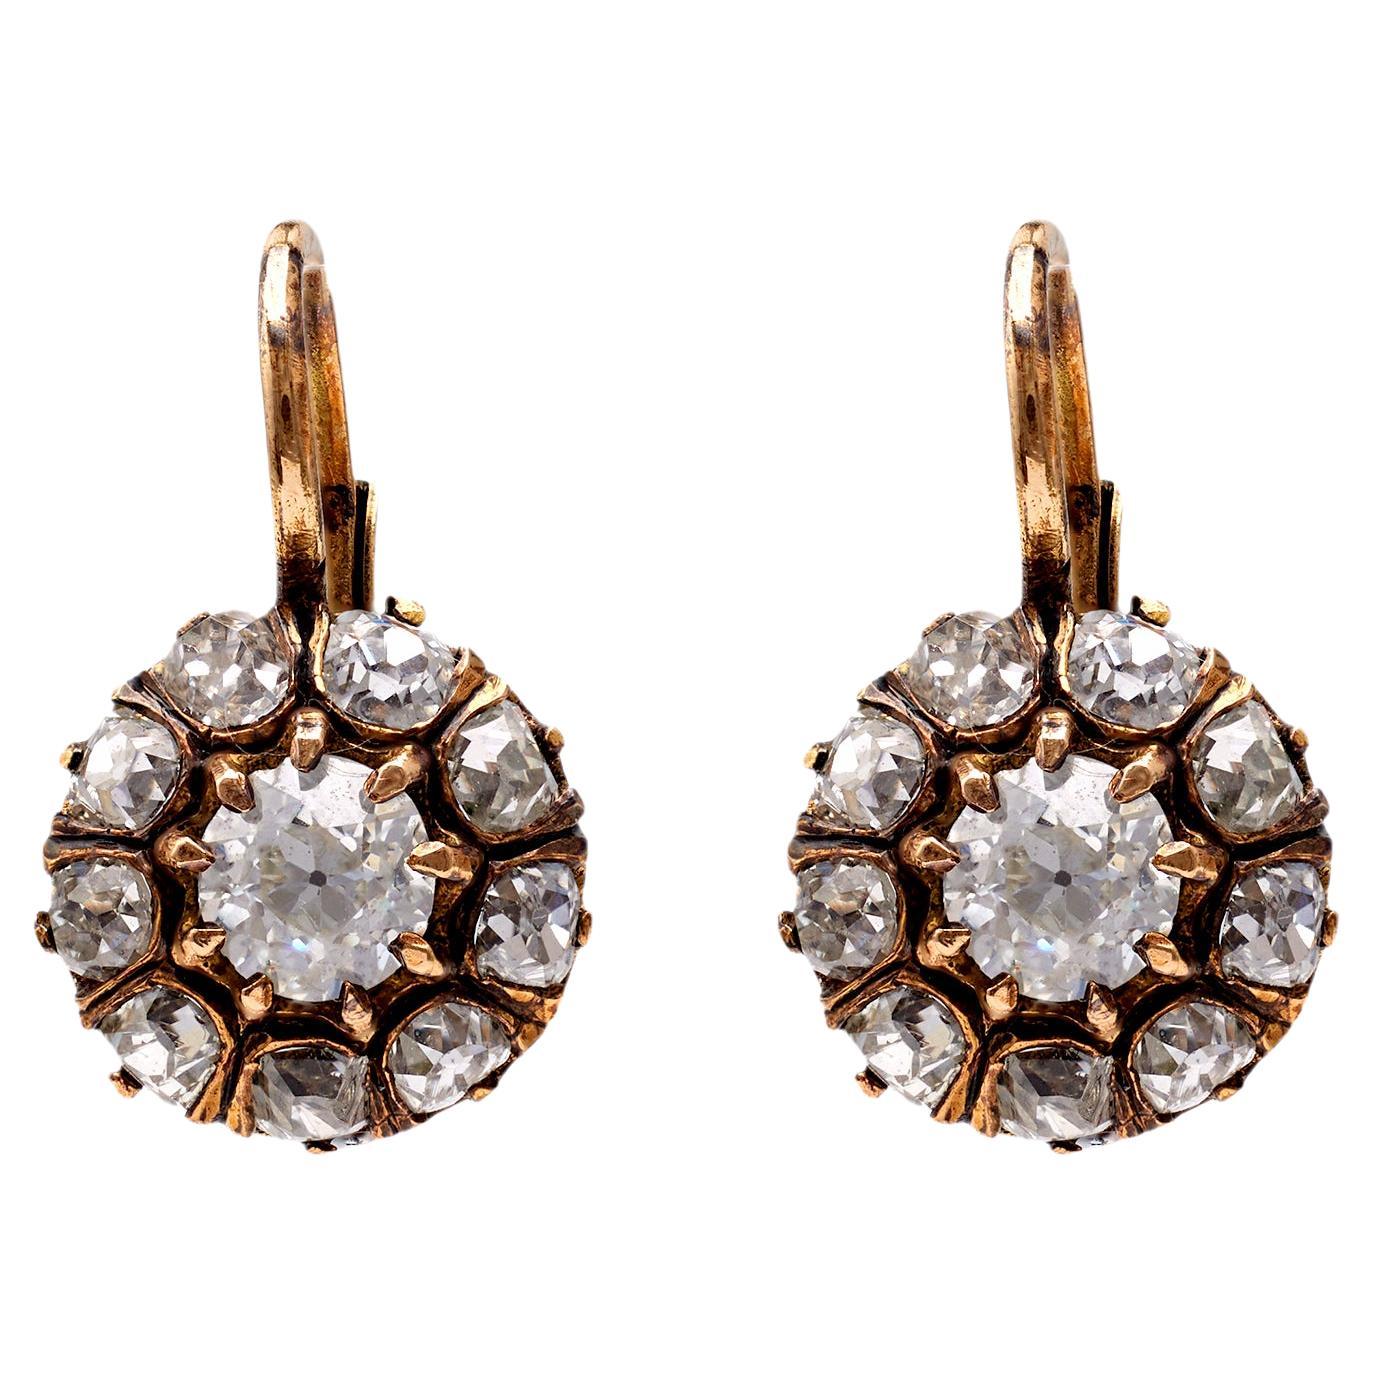 Pair of Antique Diamond 18k Yellow Gold Cluster Drop Earrings